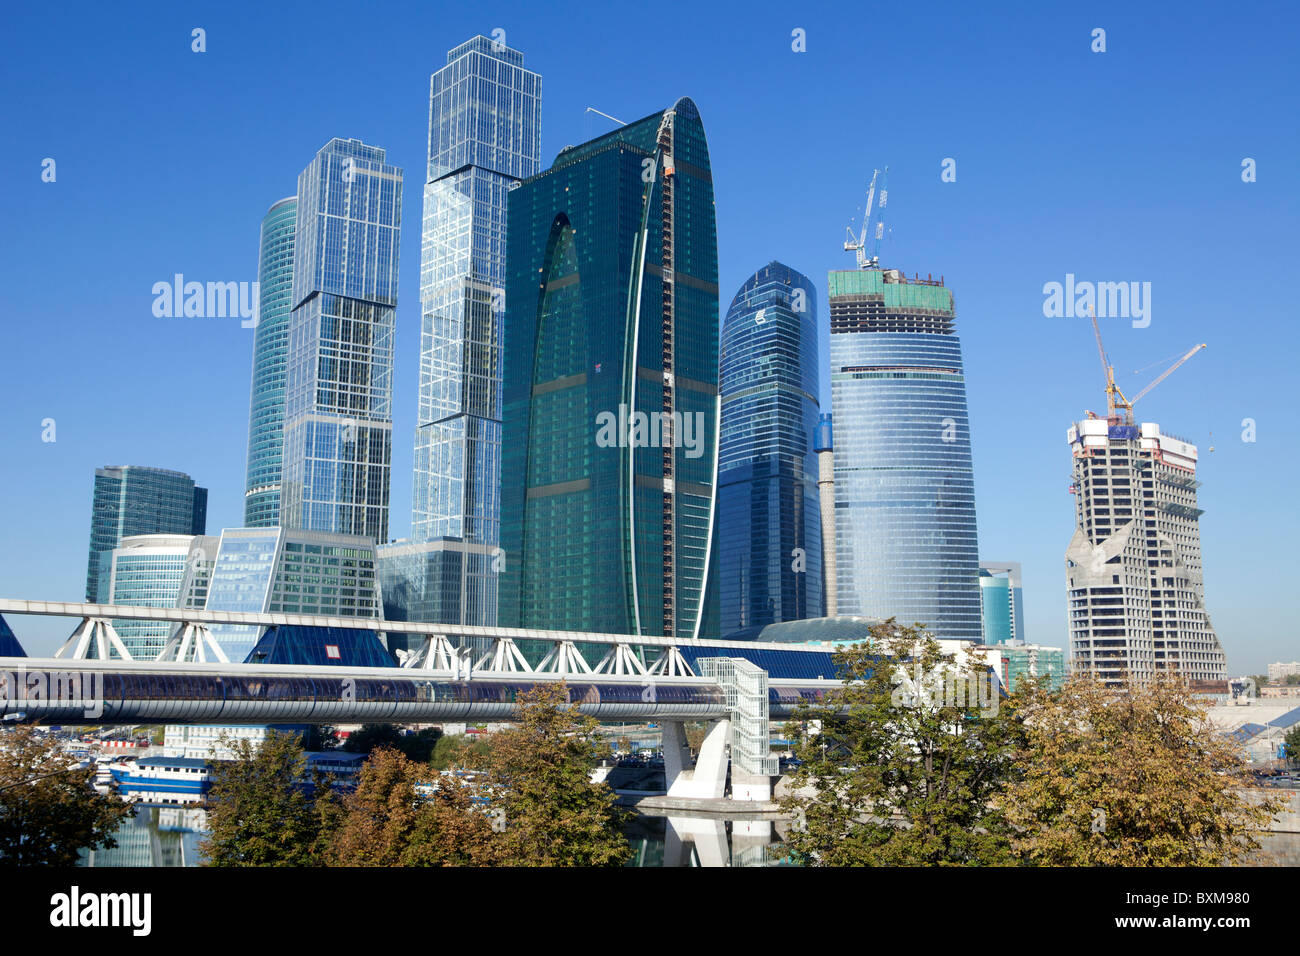 Skyline Of The City Of Capitals In Moscow Russia Stock Photo Alamy